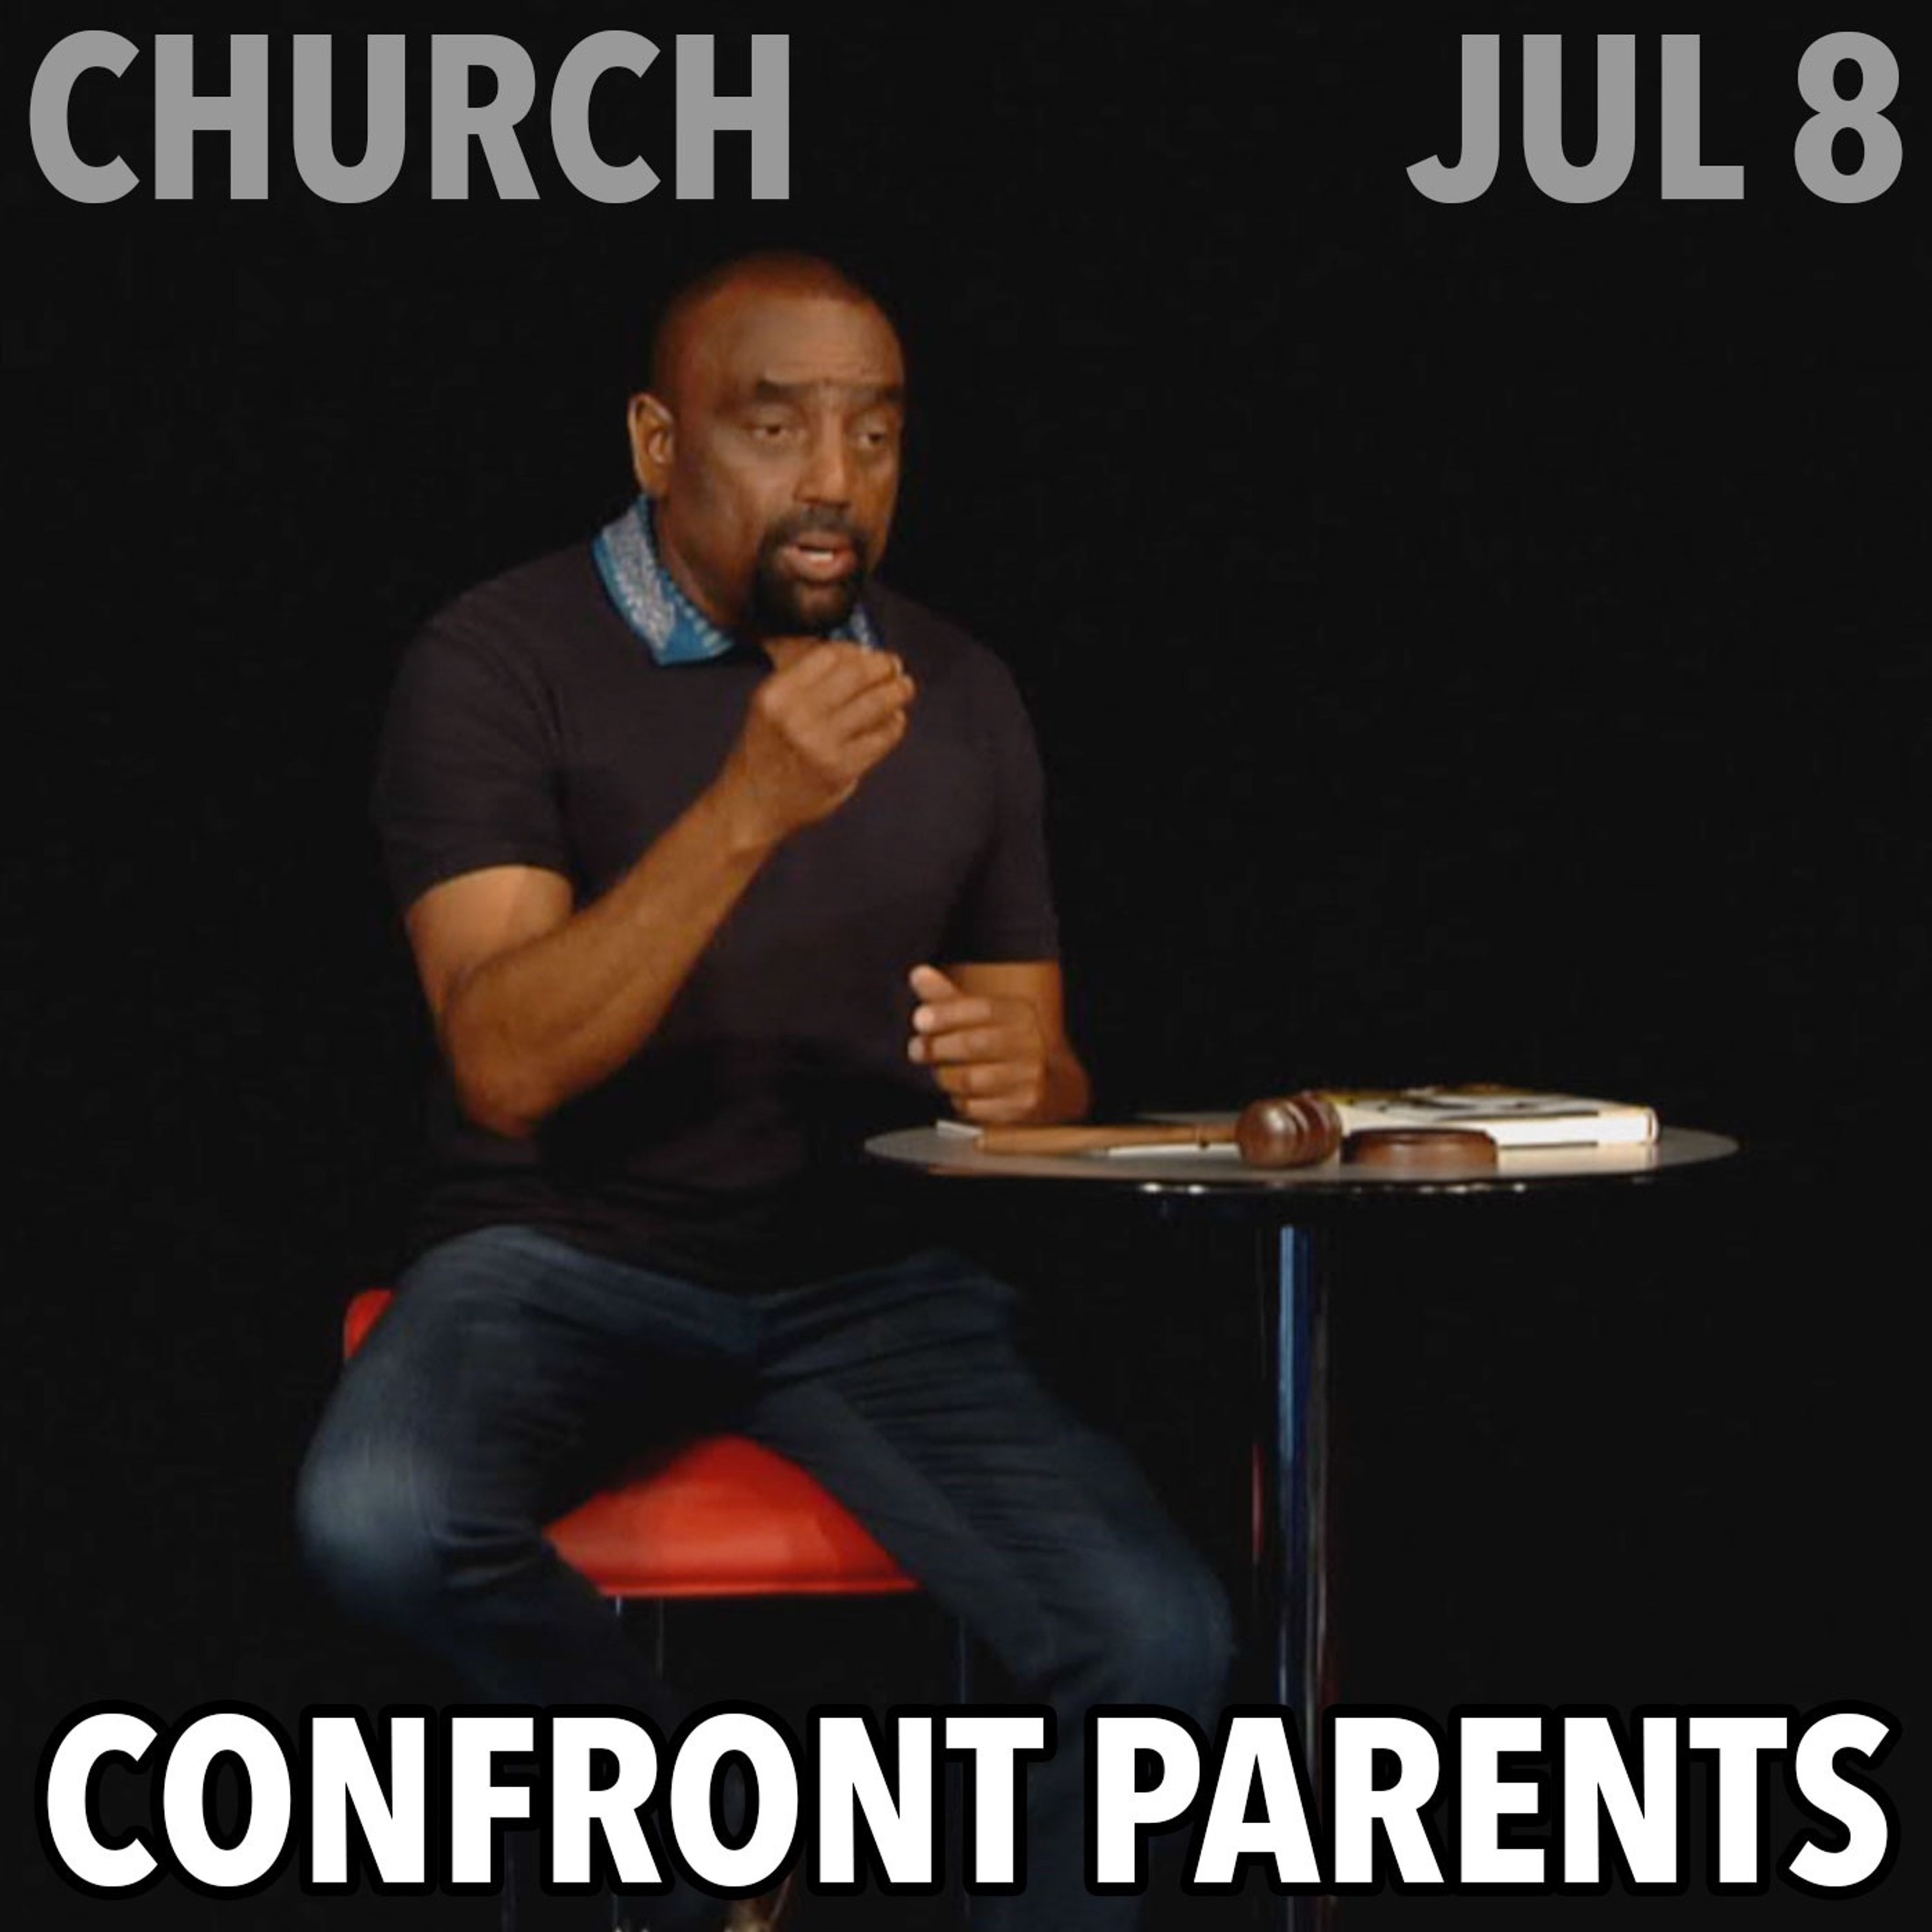 Confront Your Fear (Mother/Parents) and Gain Courage (Church July 8)